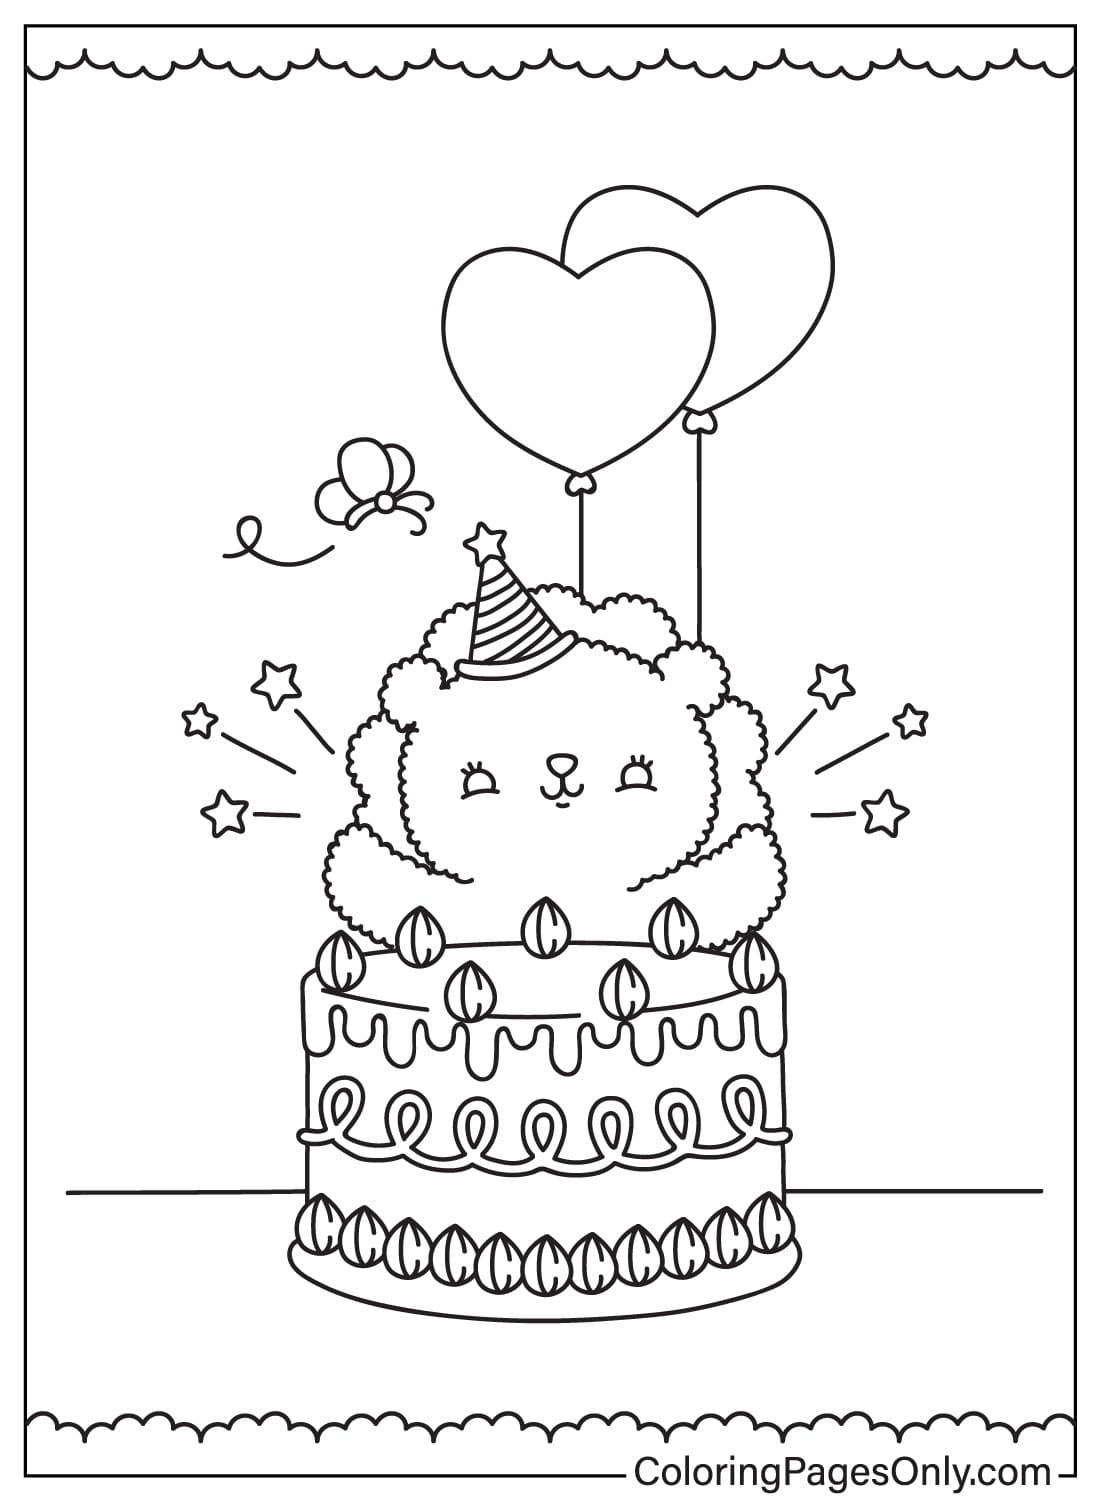 Birthday Cake Coloring Pages to Download from Birthday Cake